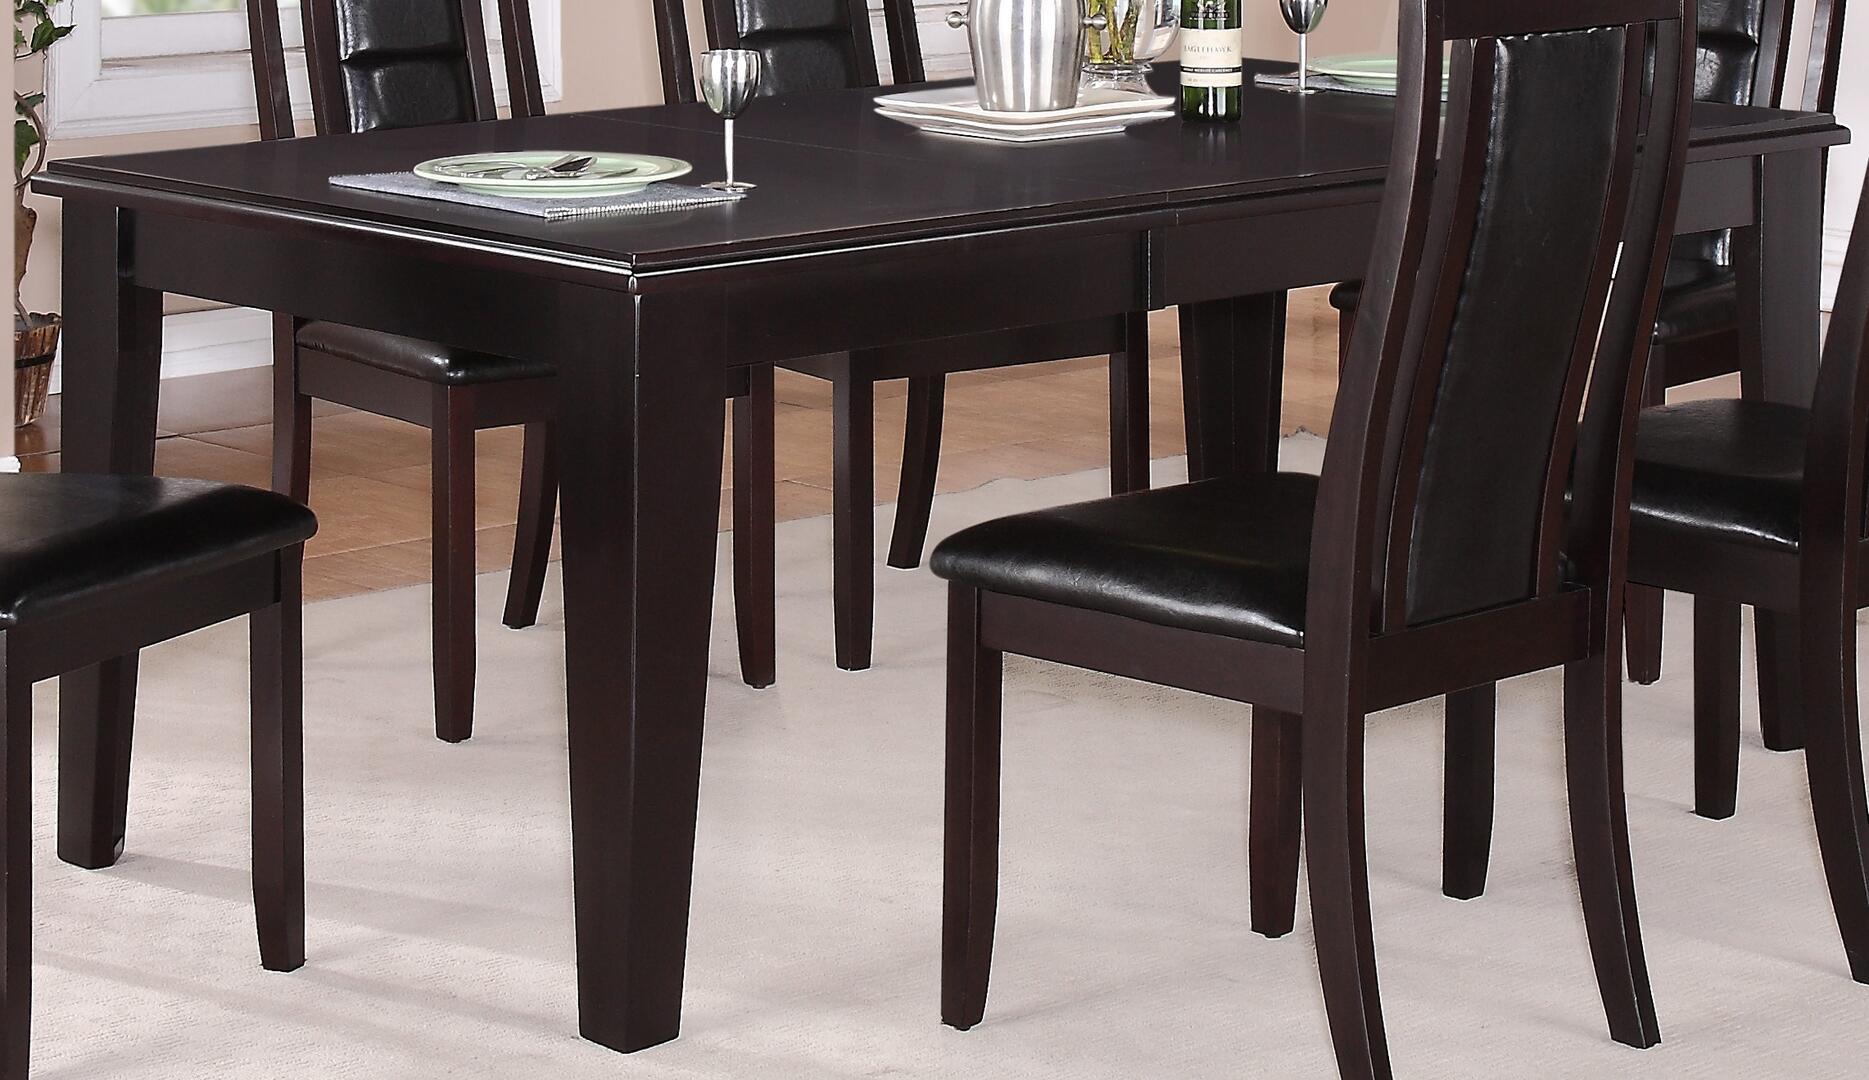 

    
Espresso Finish Wood Dining Room Table Transitional Cosmos Furniture Era
